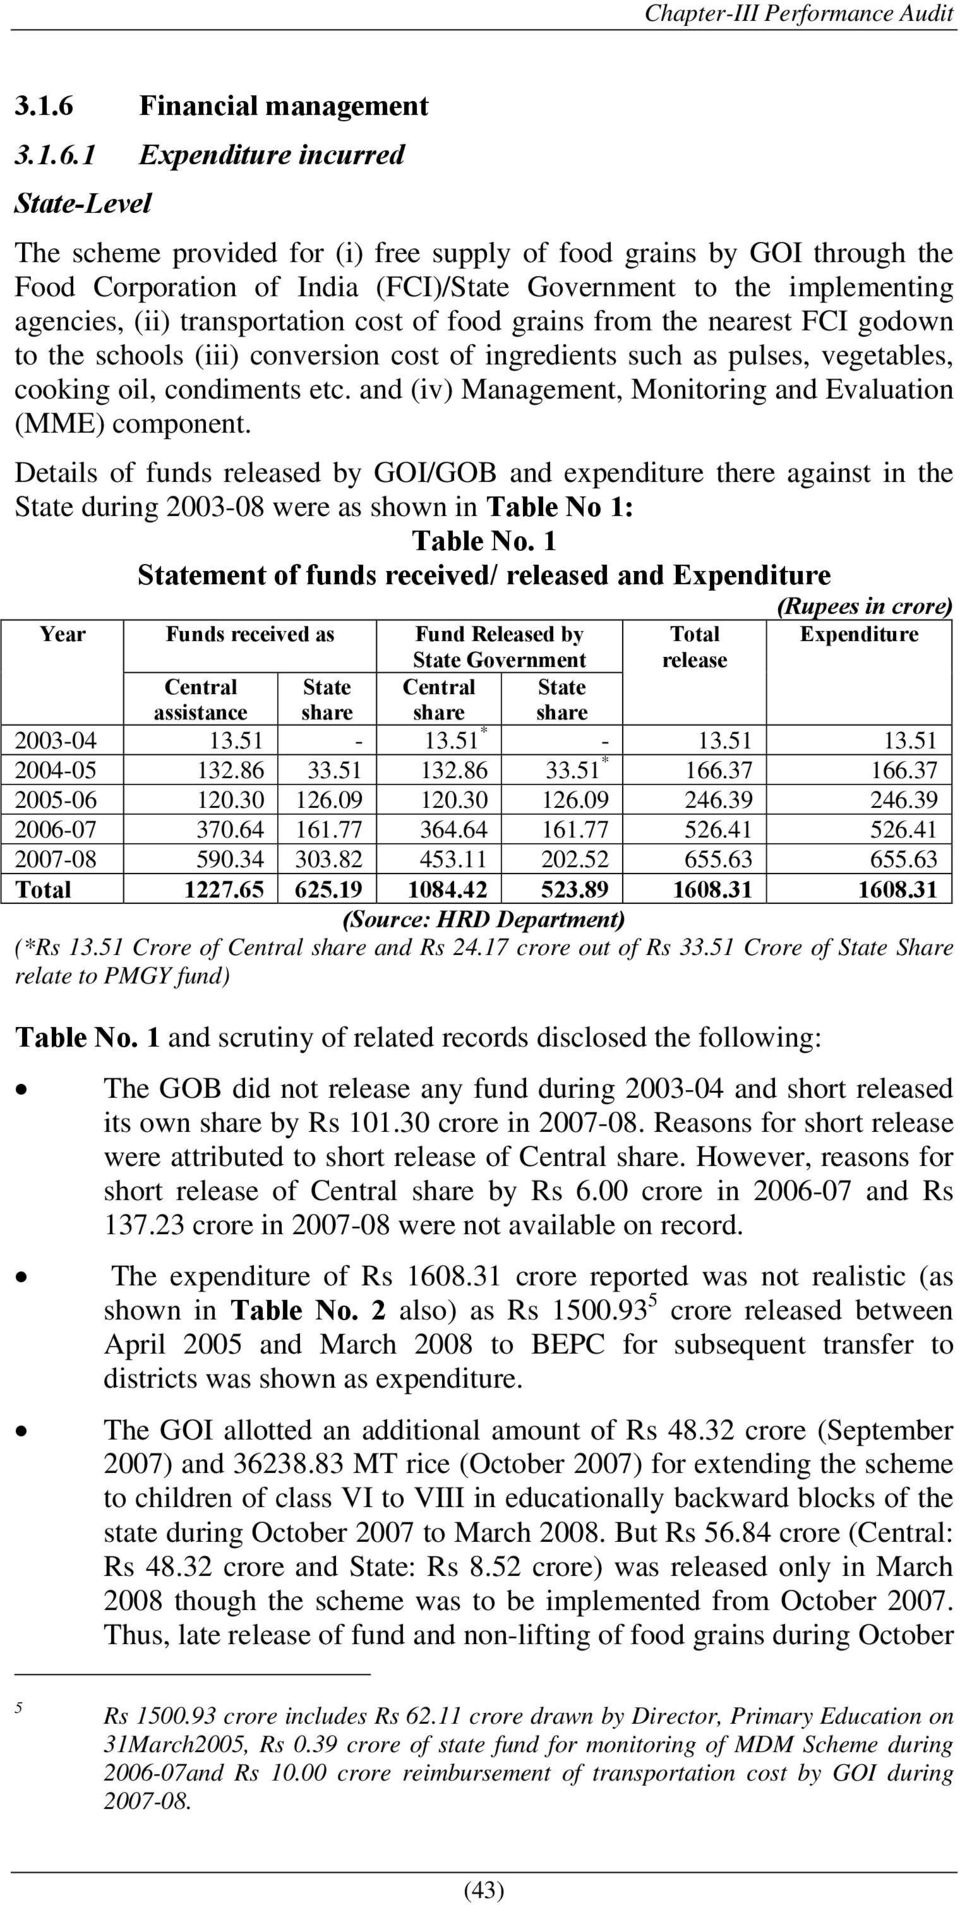 1 Expenditure incurred State-Level The scheme provided for (i) free supply of food grains by GOI through the Food Corporation of India (FCI)/State Government to the implementing agencies, (ii)